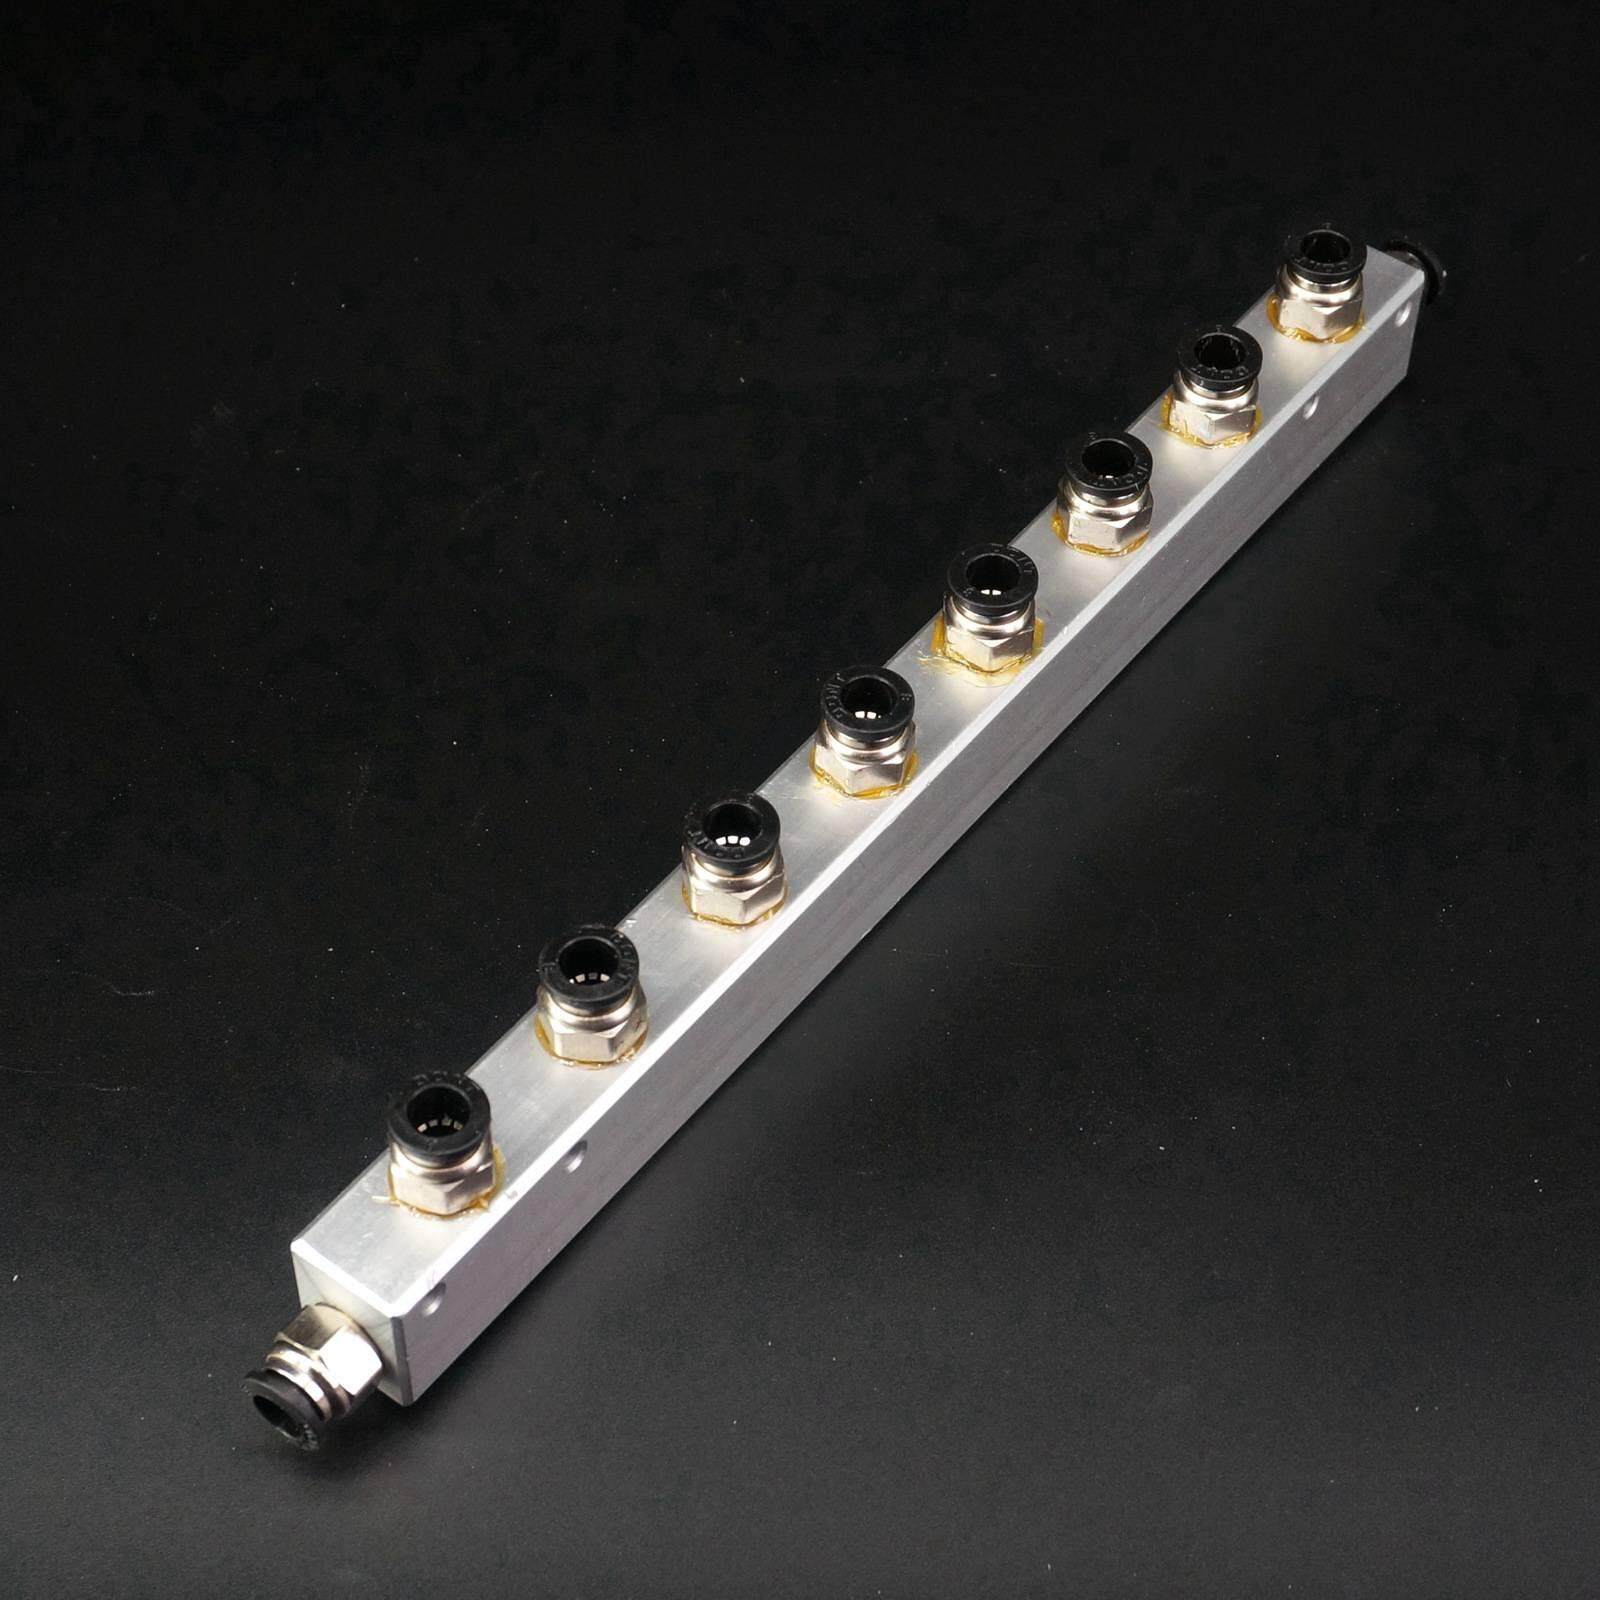 A Kit 30x30mm 2-10 Way Pneumatic Air Manifold Splitter With Push Fit Coupler 